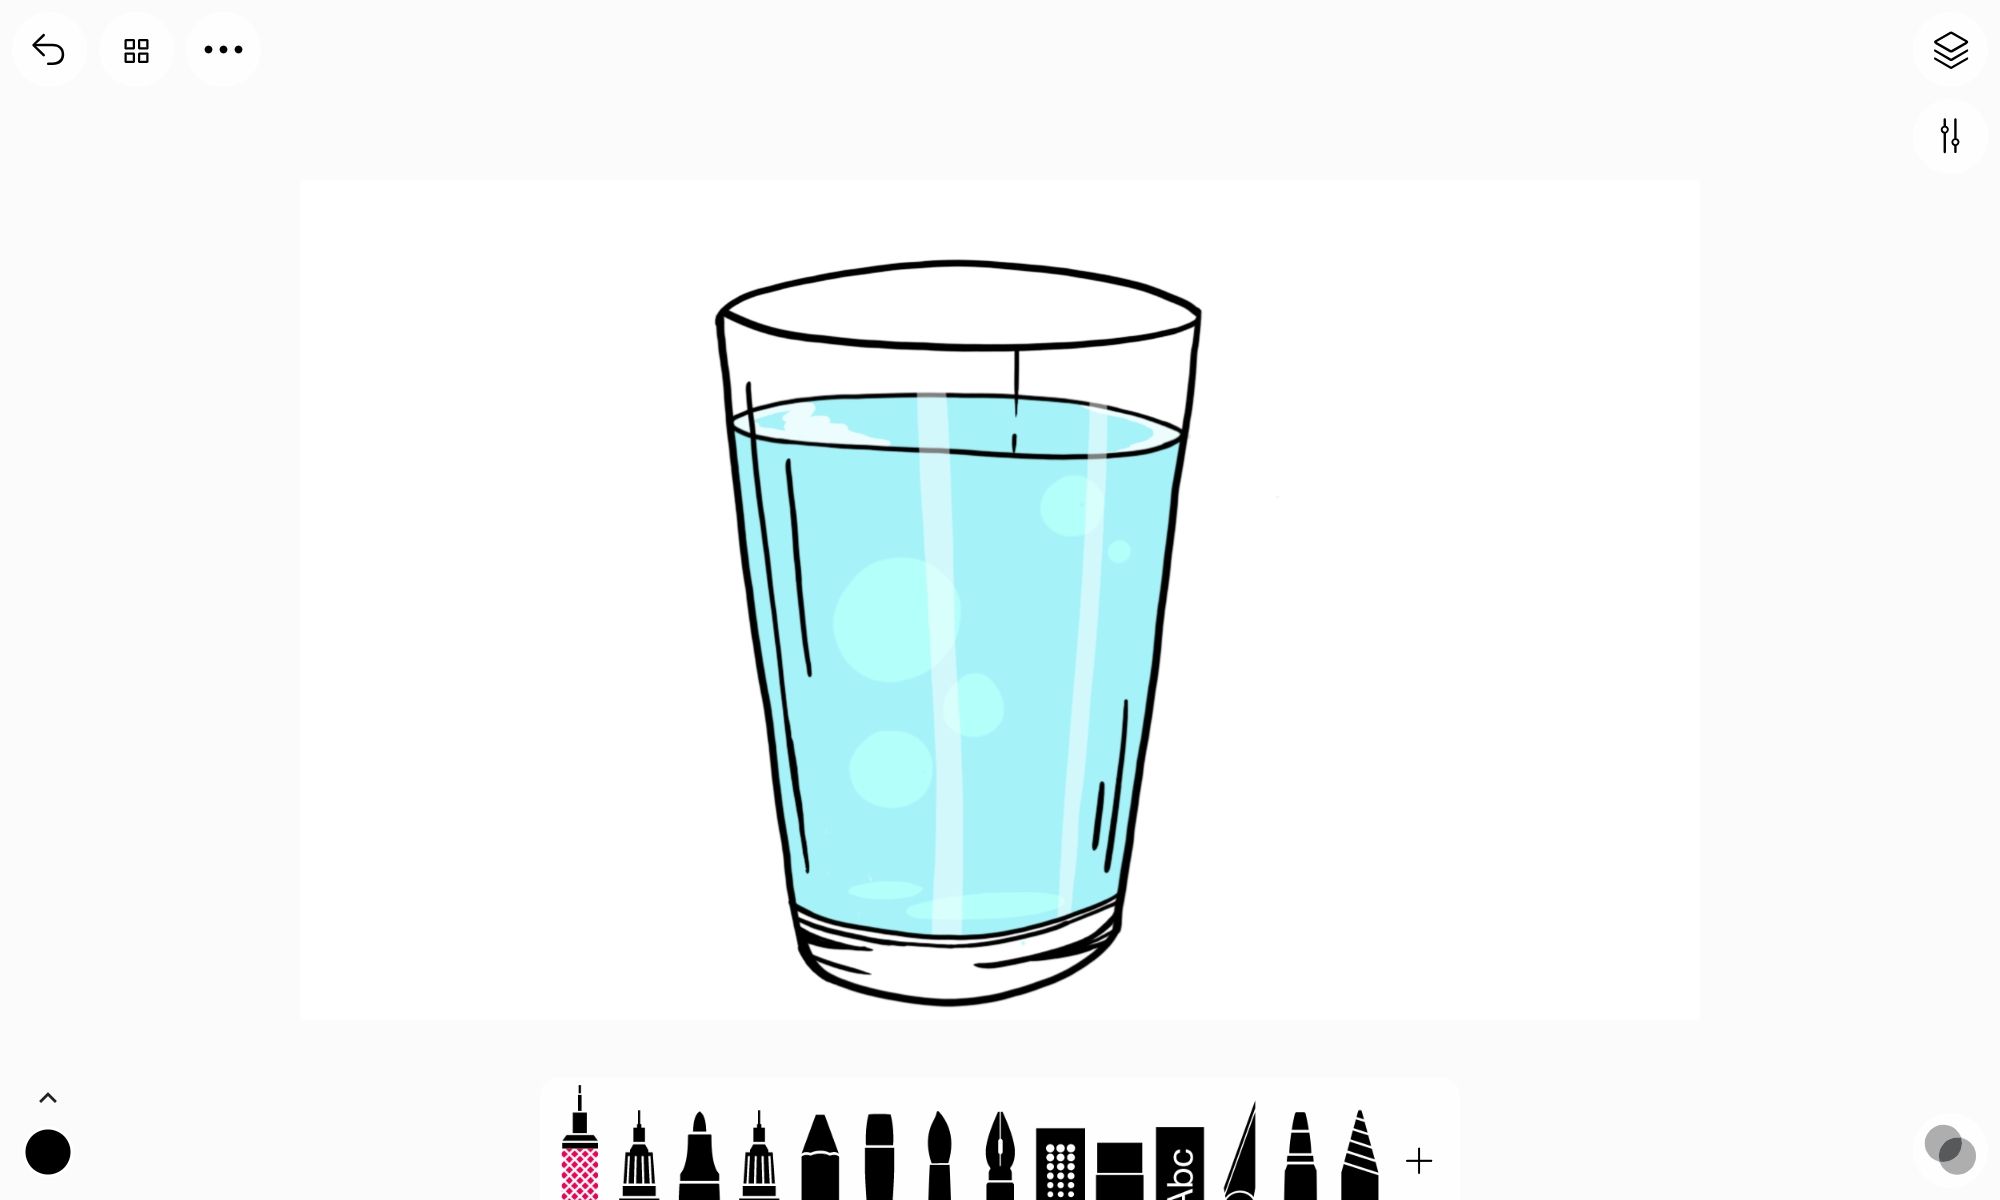 Drawing a glass of water in Tayasui Sketches on Android.